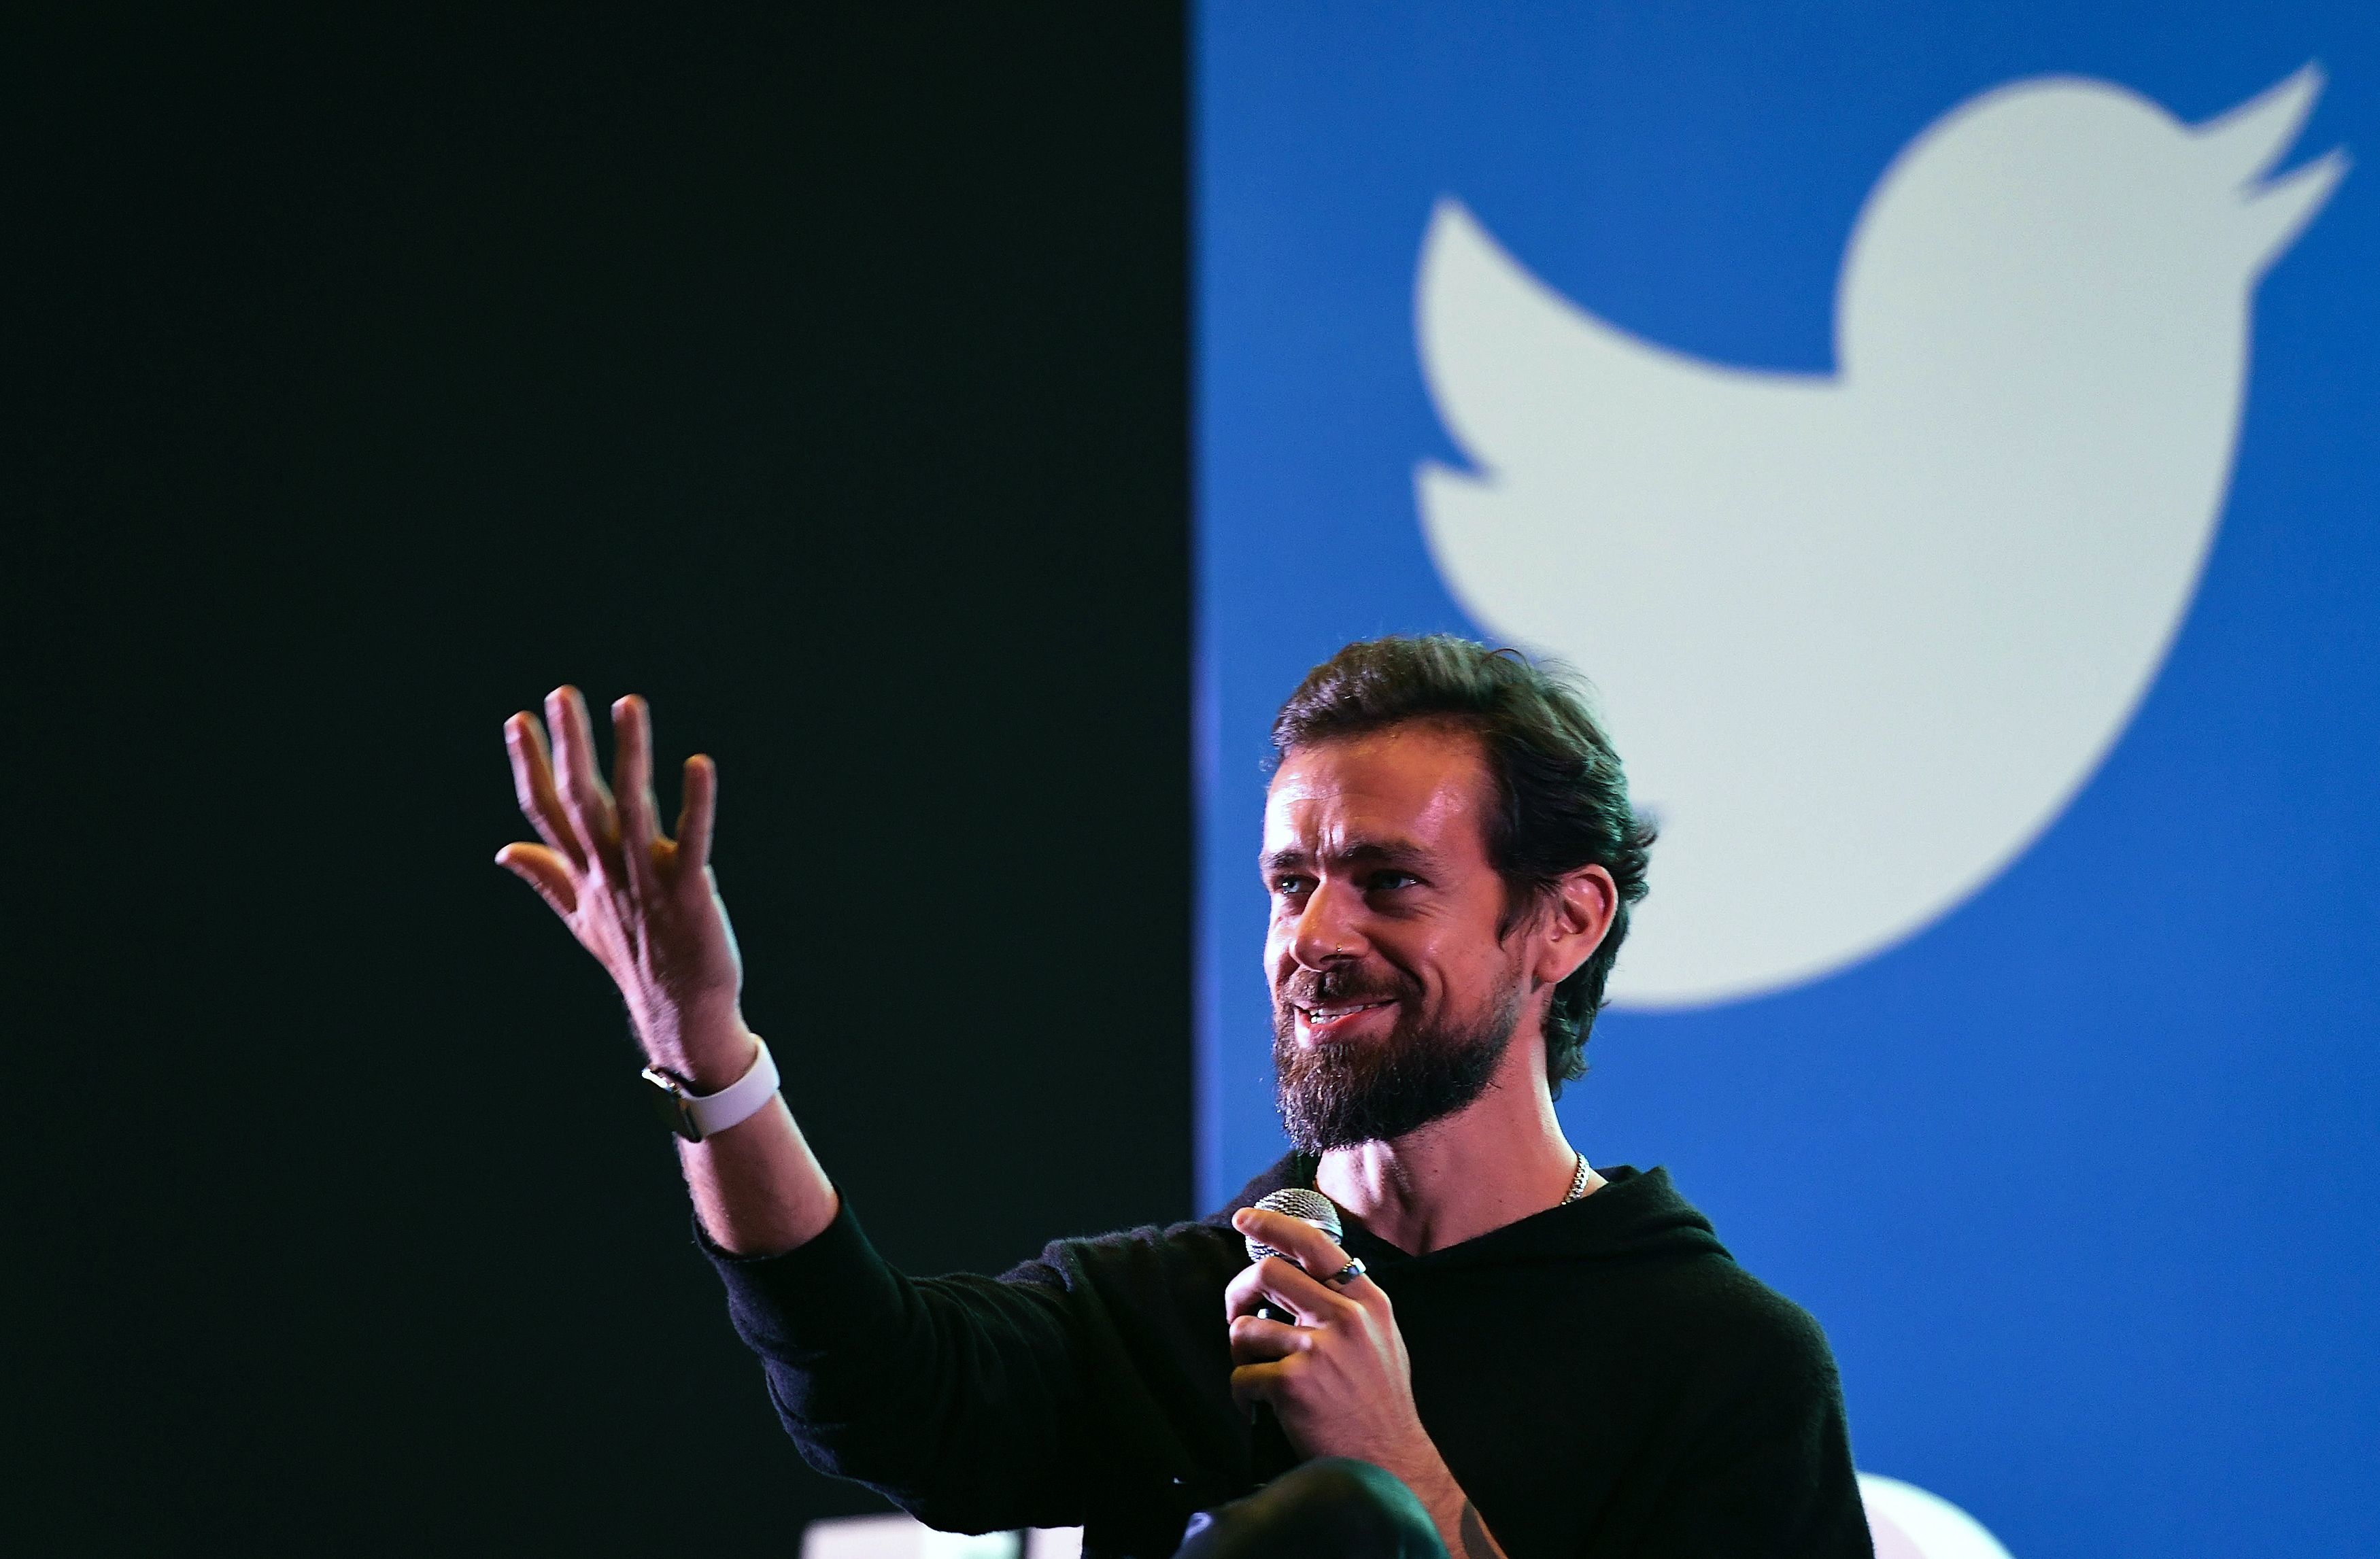 Twitter Q2 2019 earnings beat expectations